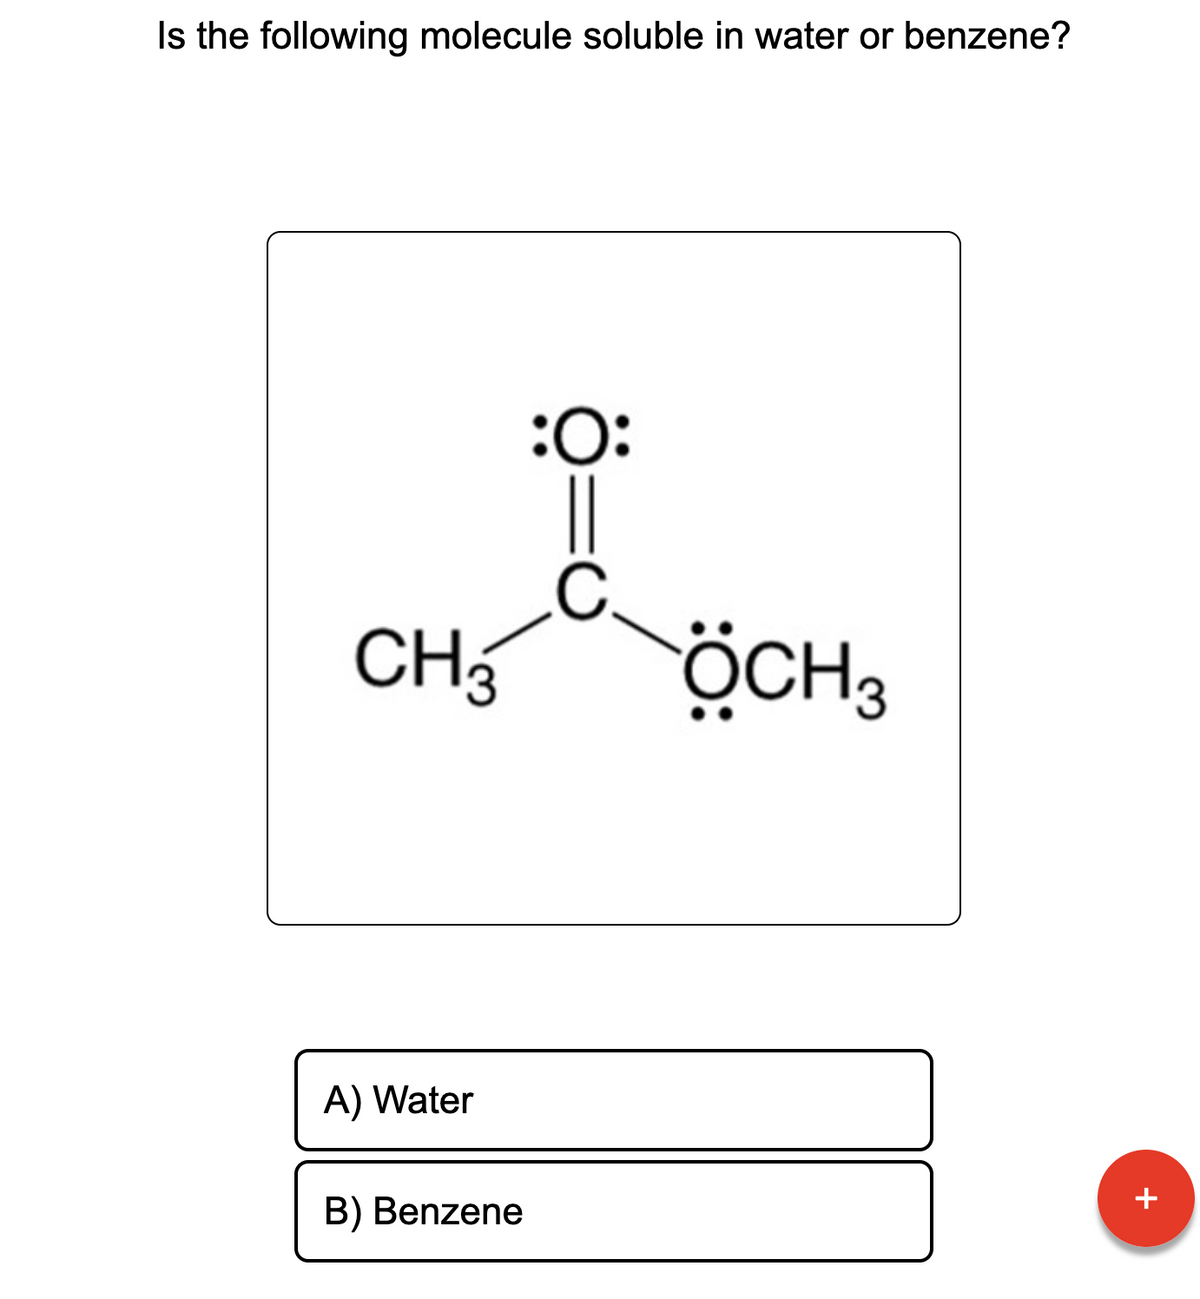 Is the following molecule soluble in water or benzene?
CH3
A) Water
B) Benzene
:O:
C.
ÖCH3
+